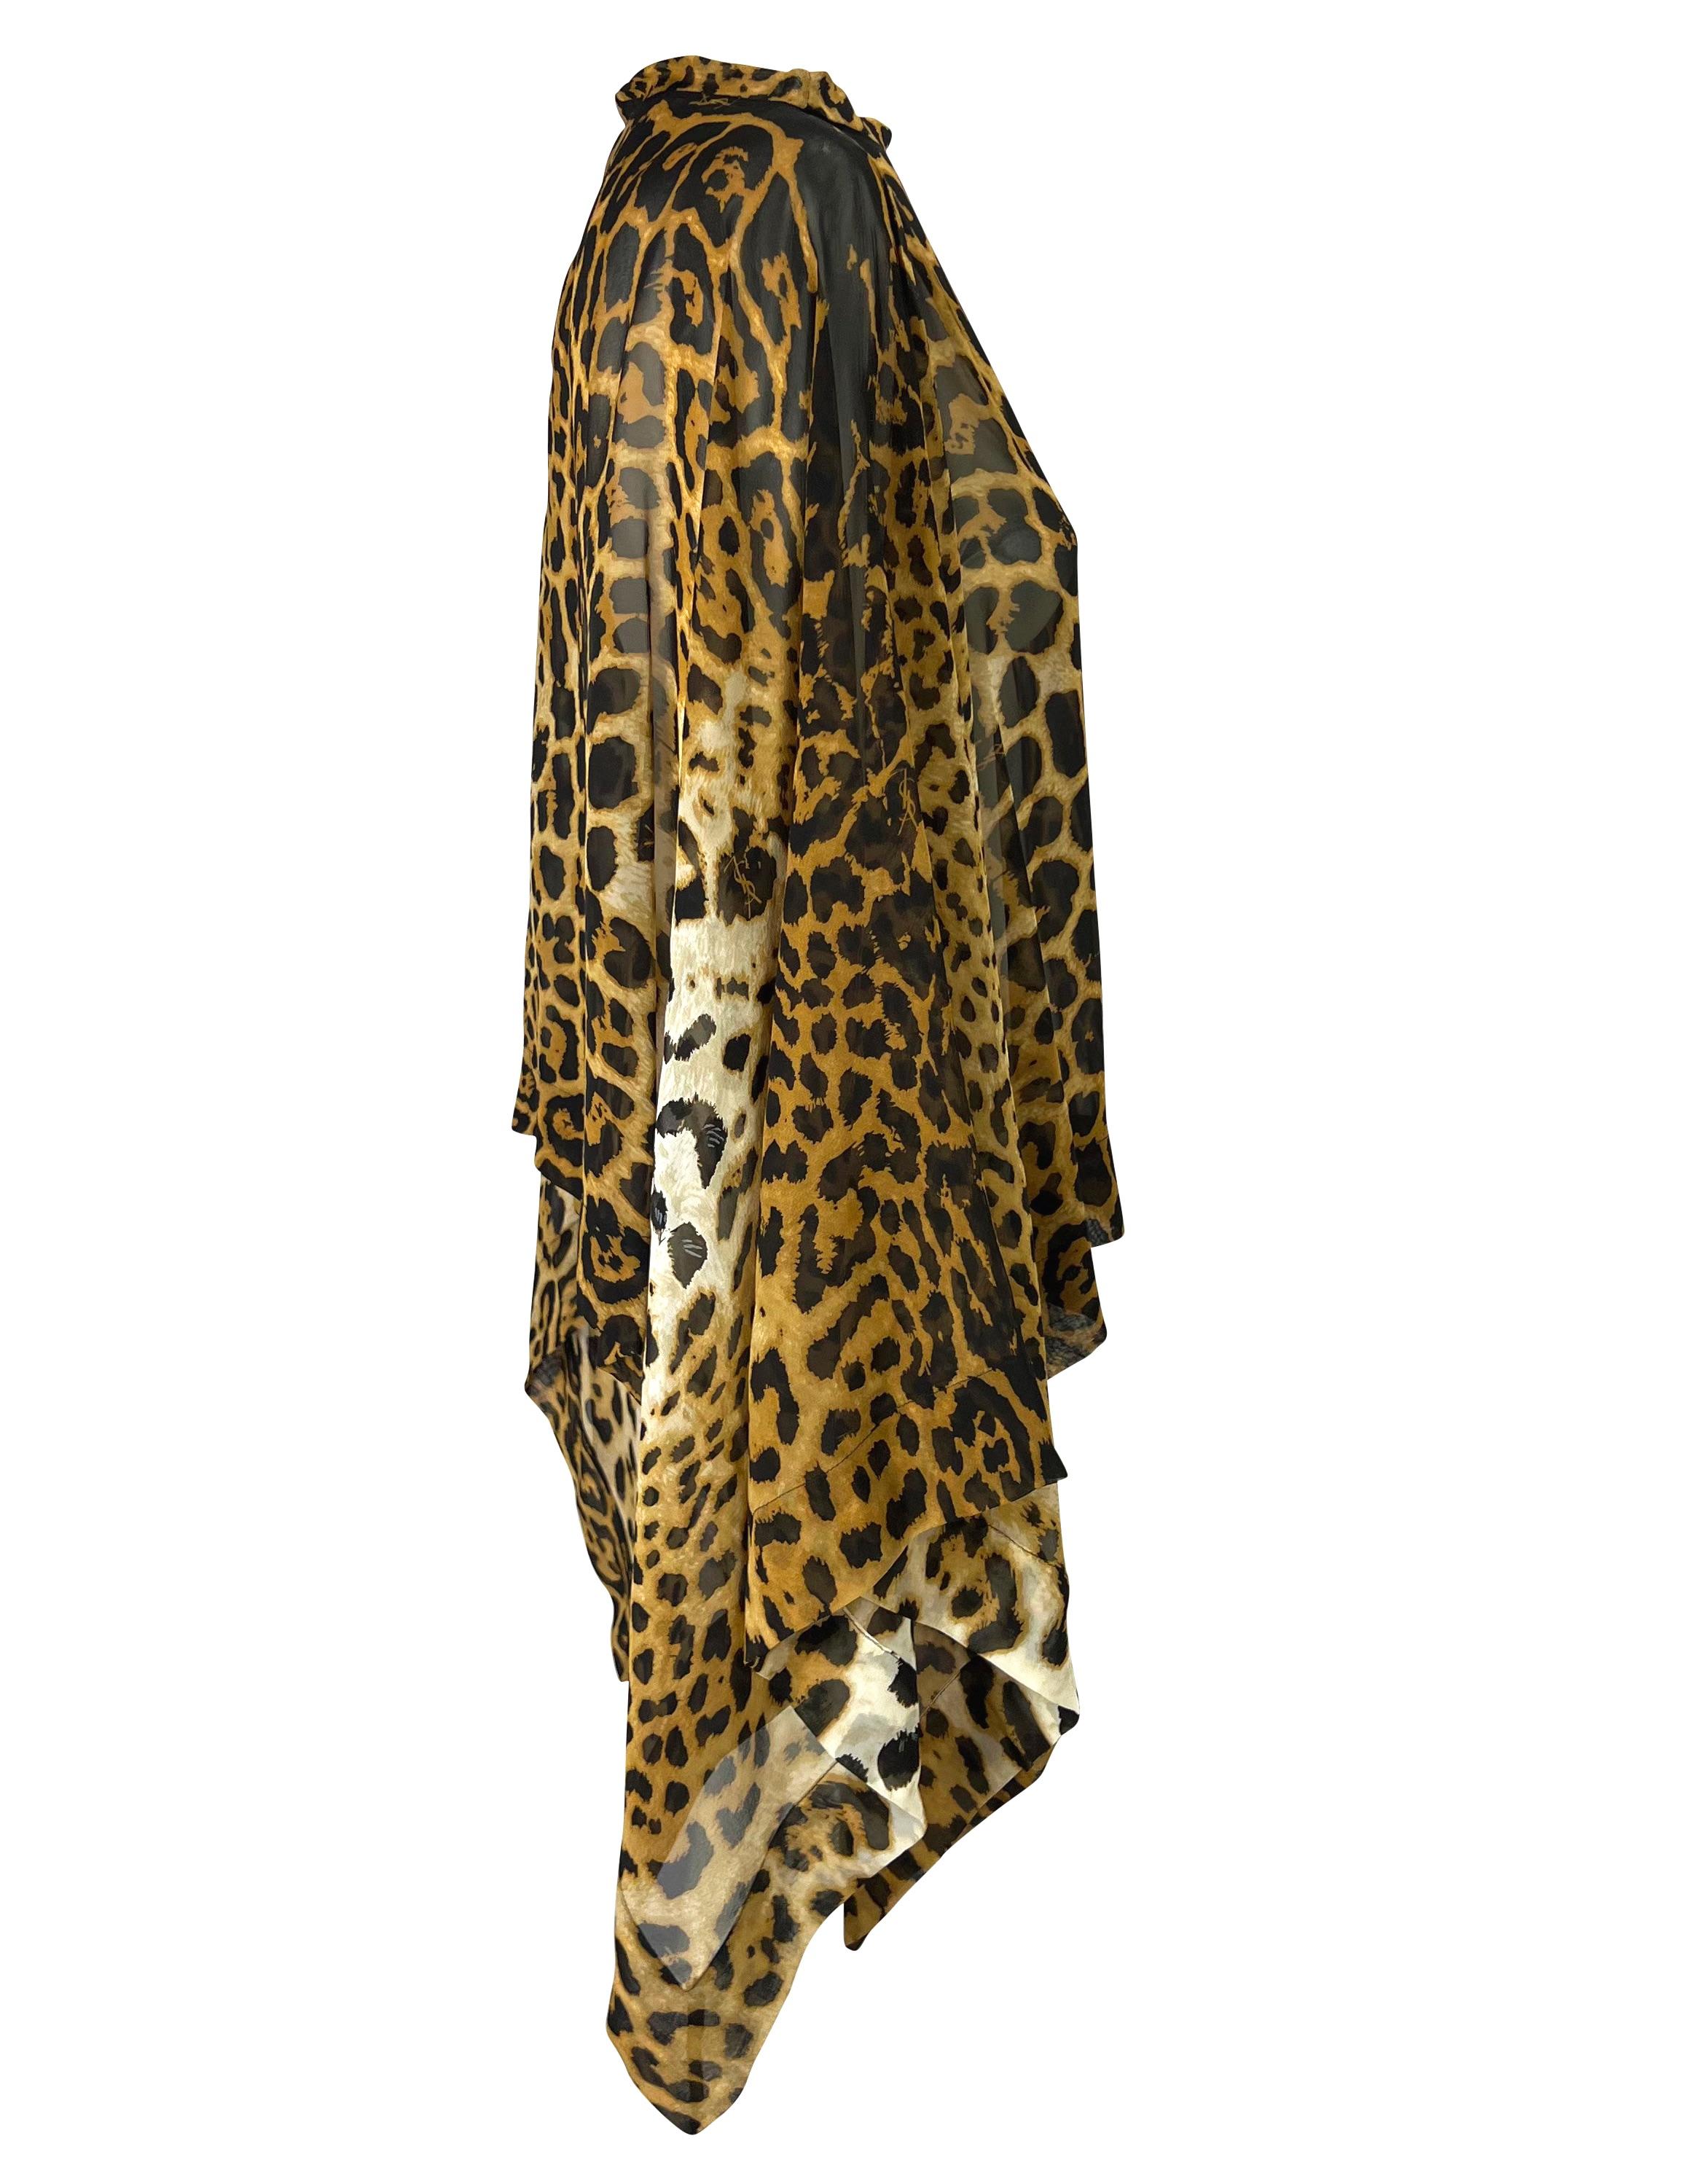 S/S 2002 Yves Saint Laurent by Tom Ford Safari Cheetah Print Sheer Kaftan Short In Good Condition For Sale In West Hollywood, CA